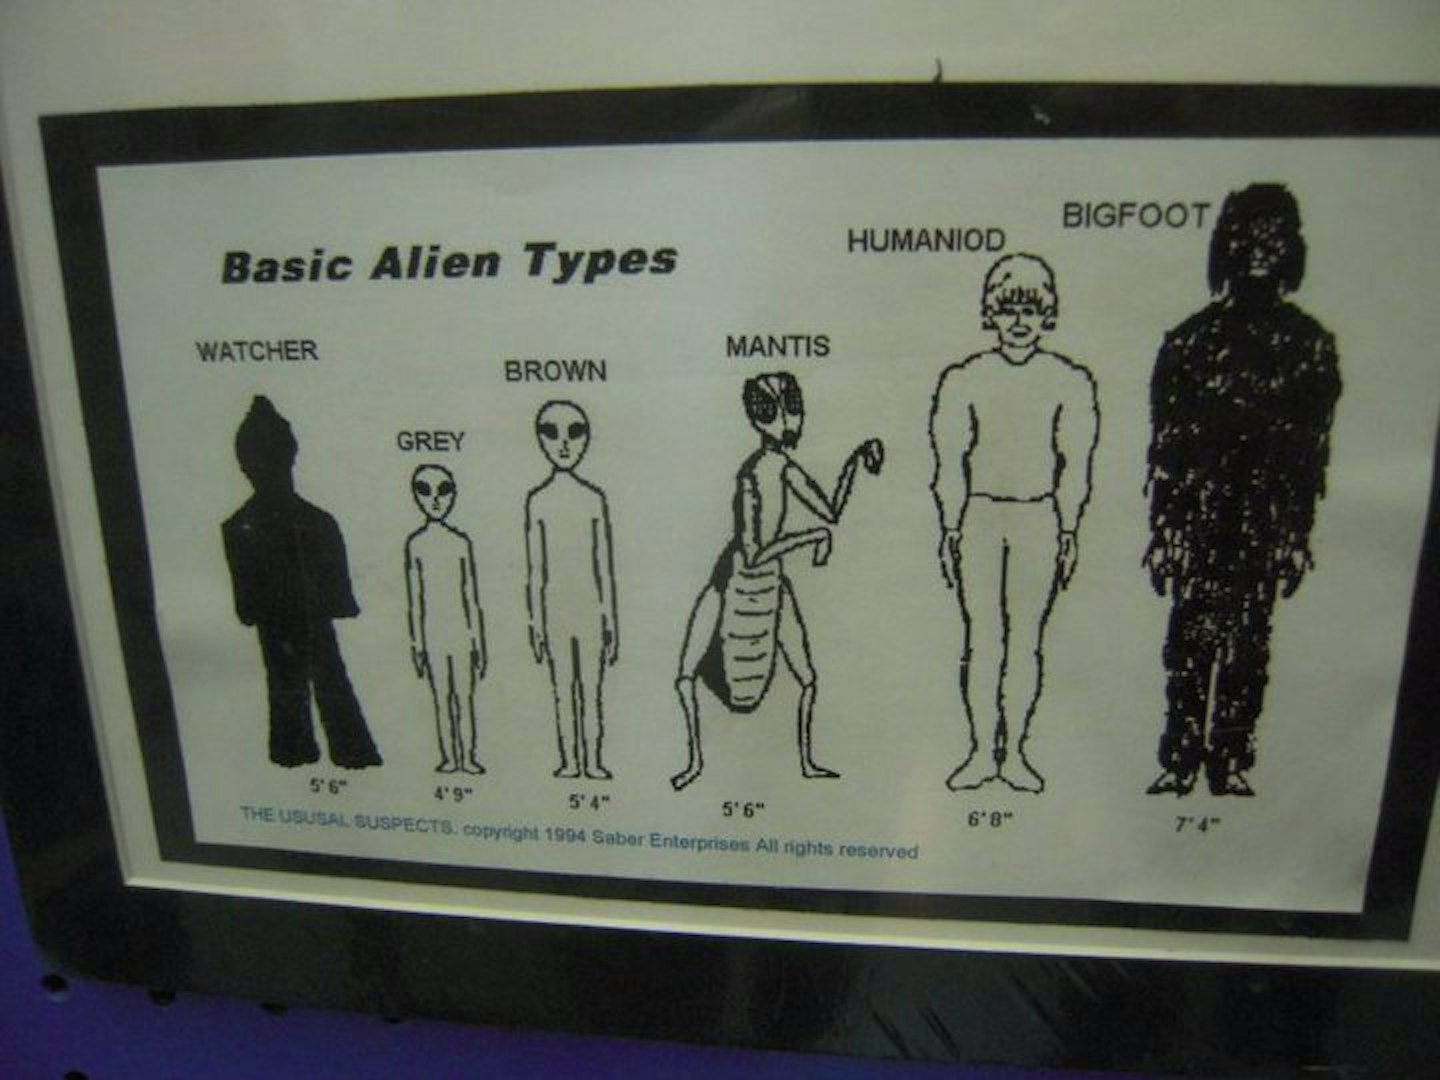 Many, many Festivalgoers reference this guide to extraterrestrial life. “Greys” are the most popular by far.